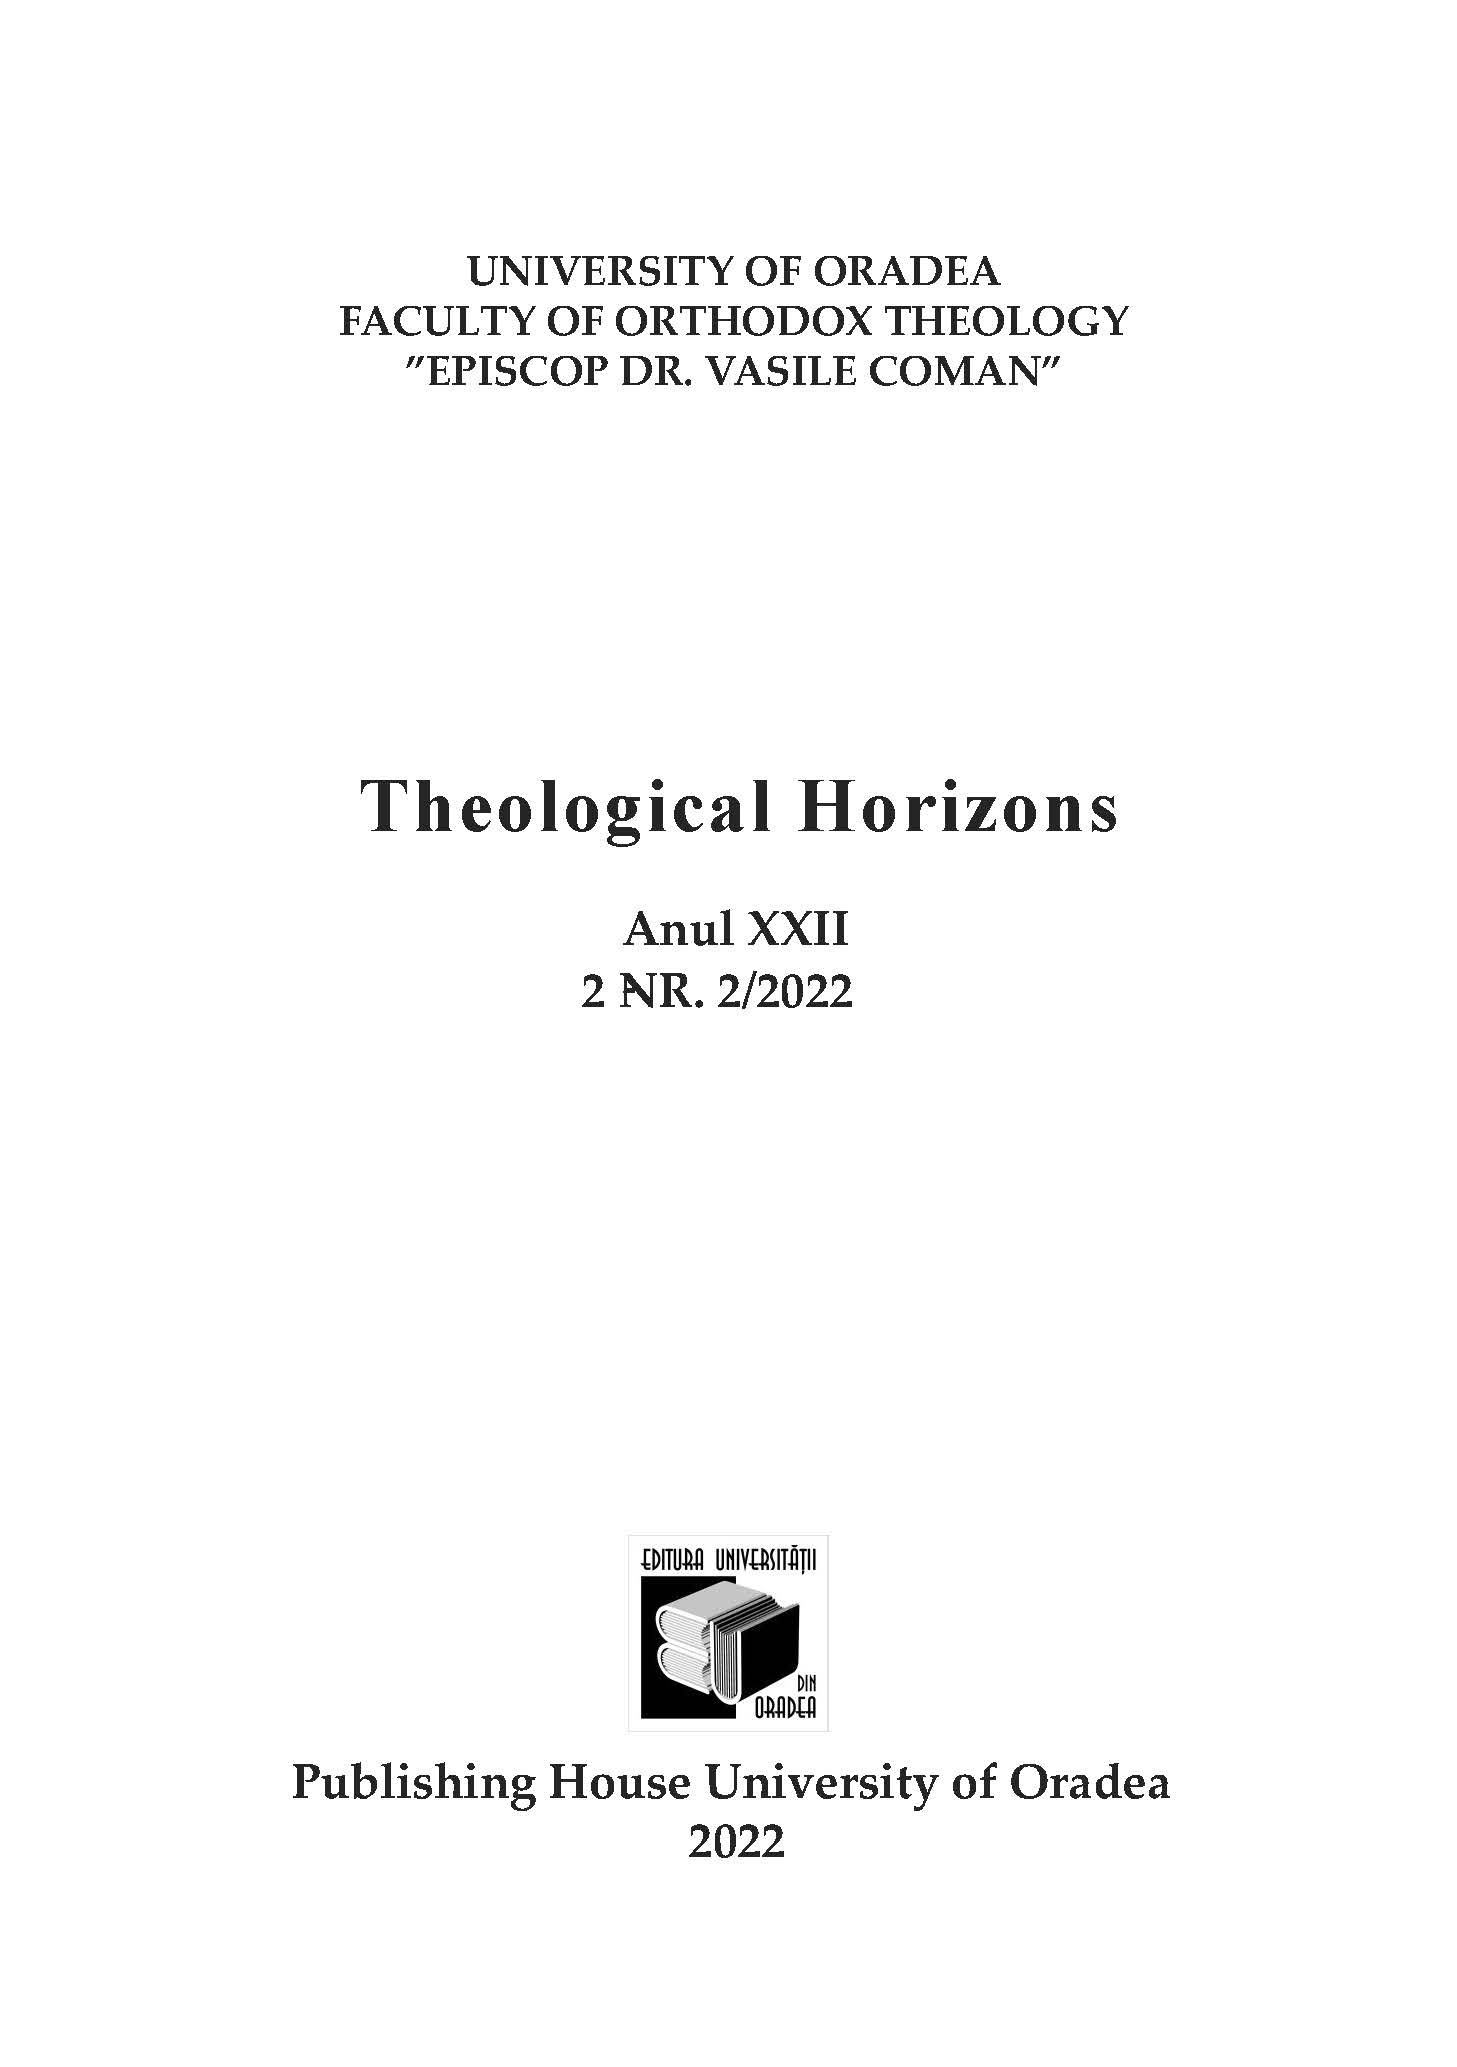 Anthropos – The Human Being: The Paradigms of an Integral Anthropological Model, Fr. Alexandru Buzalic